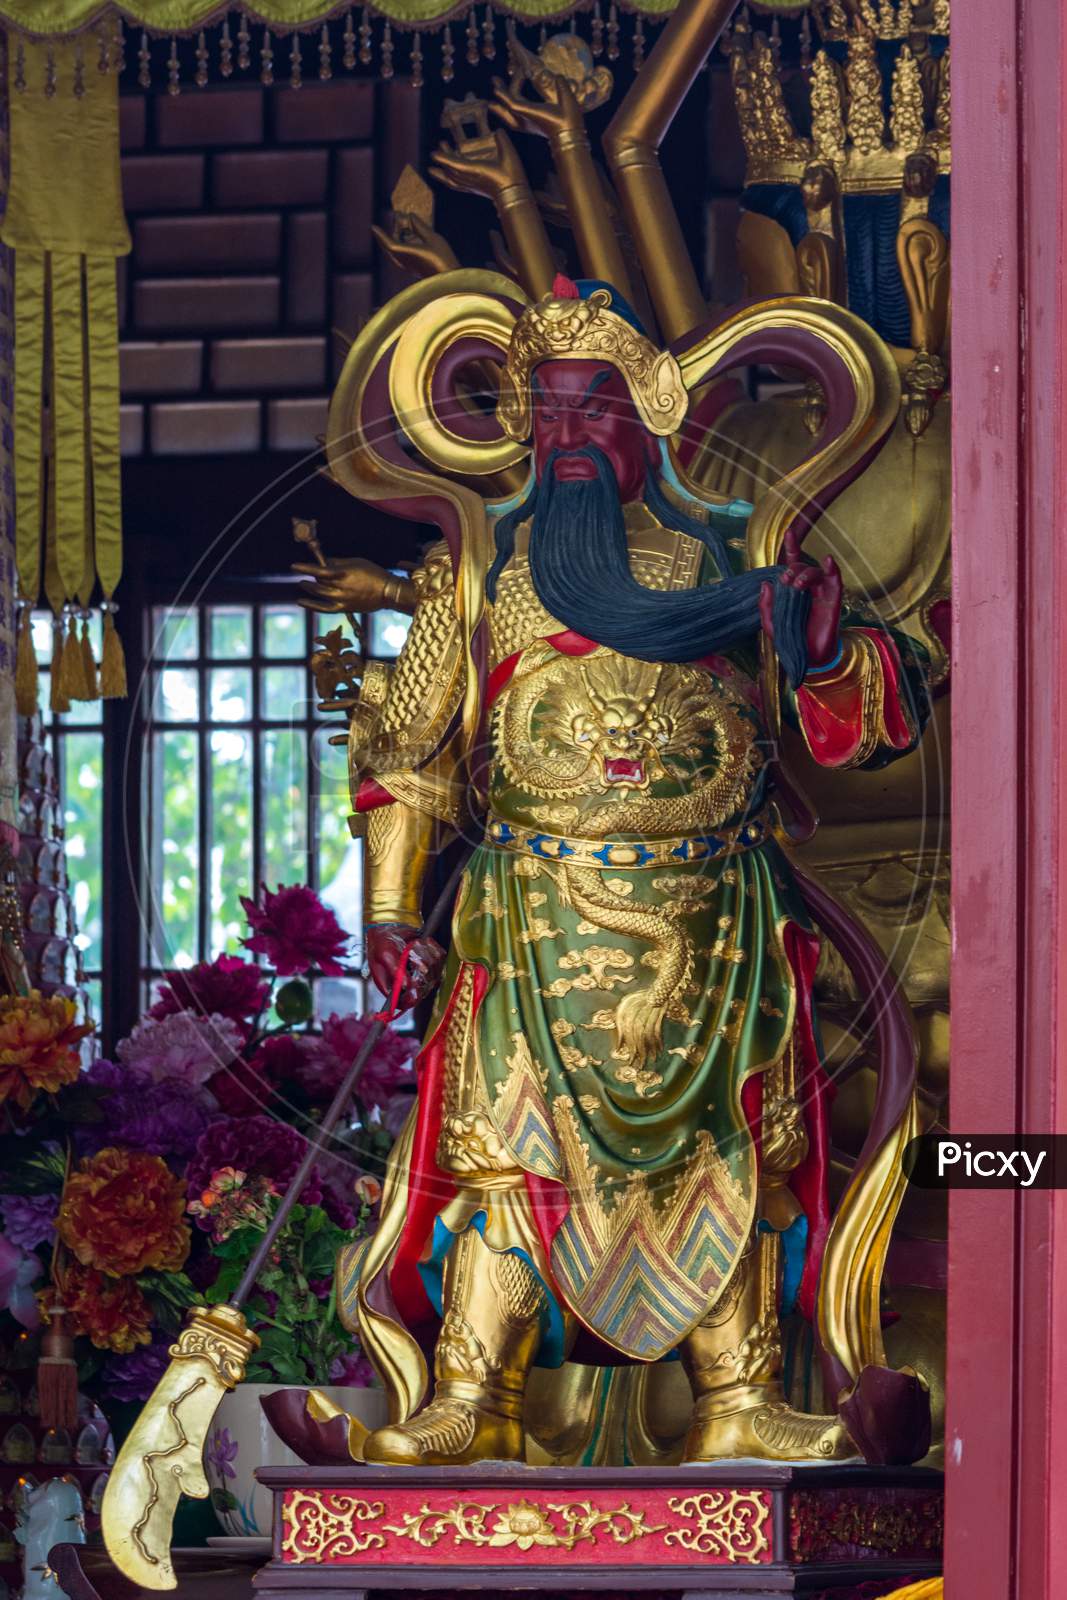 Statue Of Guan Yu At The Eight Great Temples Buddhist Complex In Beijing, China